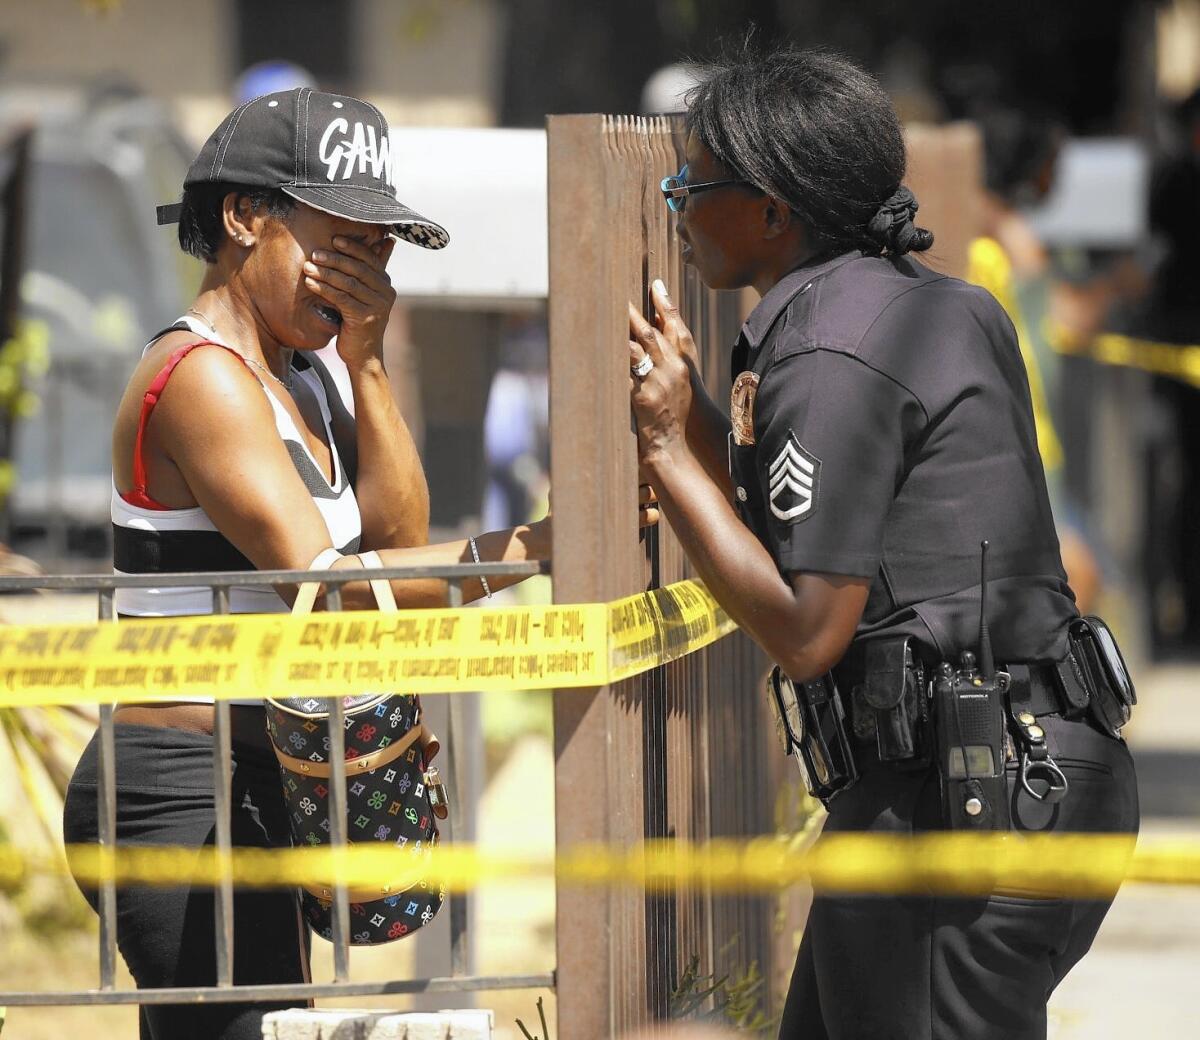 LAPD Sgt Emada Tingirides, right, talks to the sister of a homicide victim.